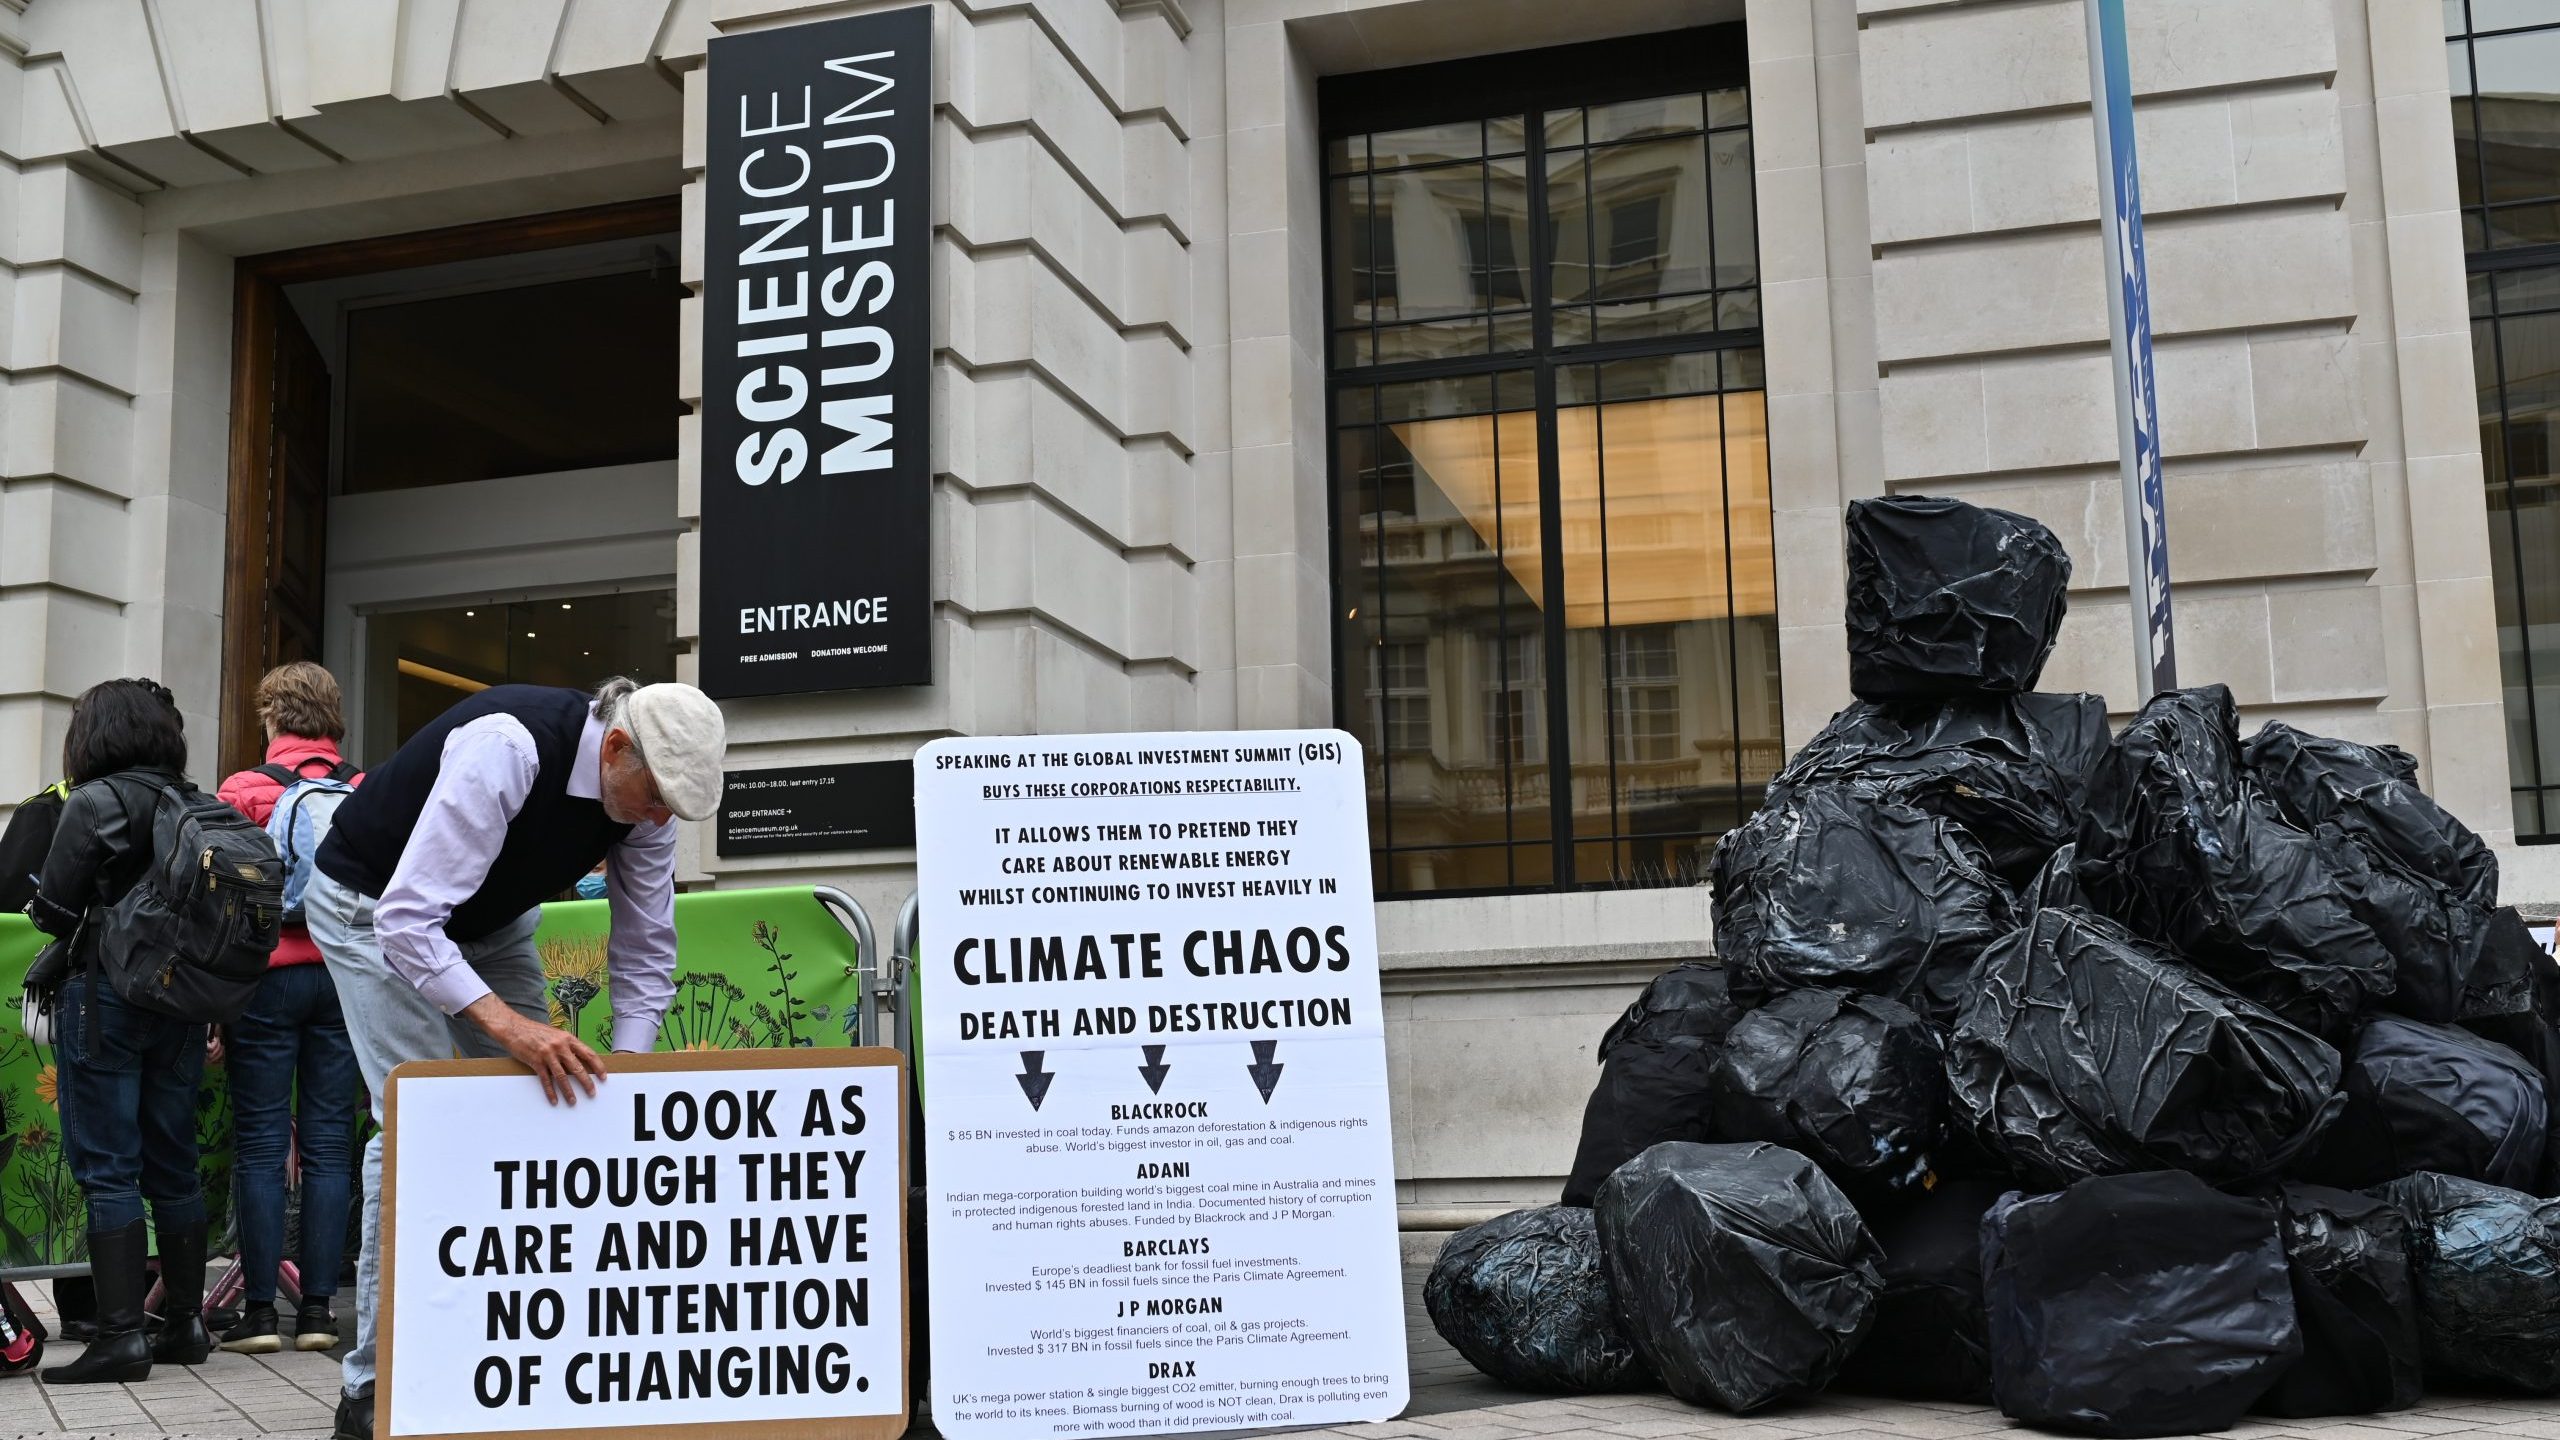 An Extinction Rebellion protest outside the Science Museum during the Global Investment Summit